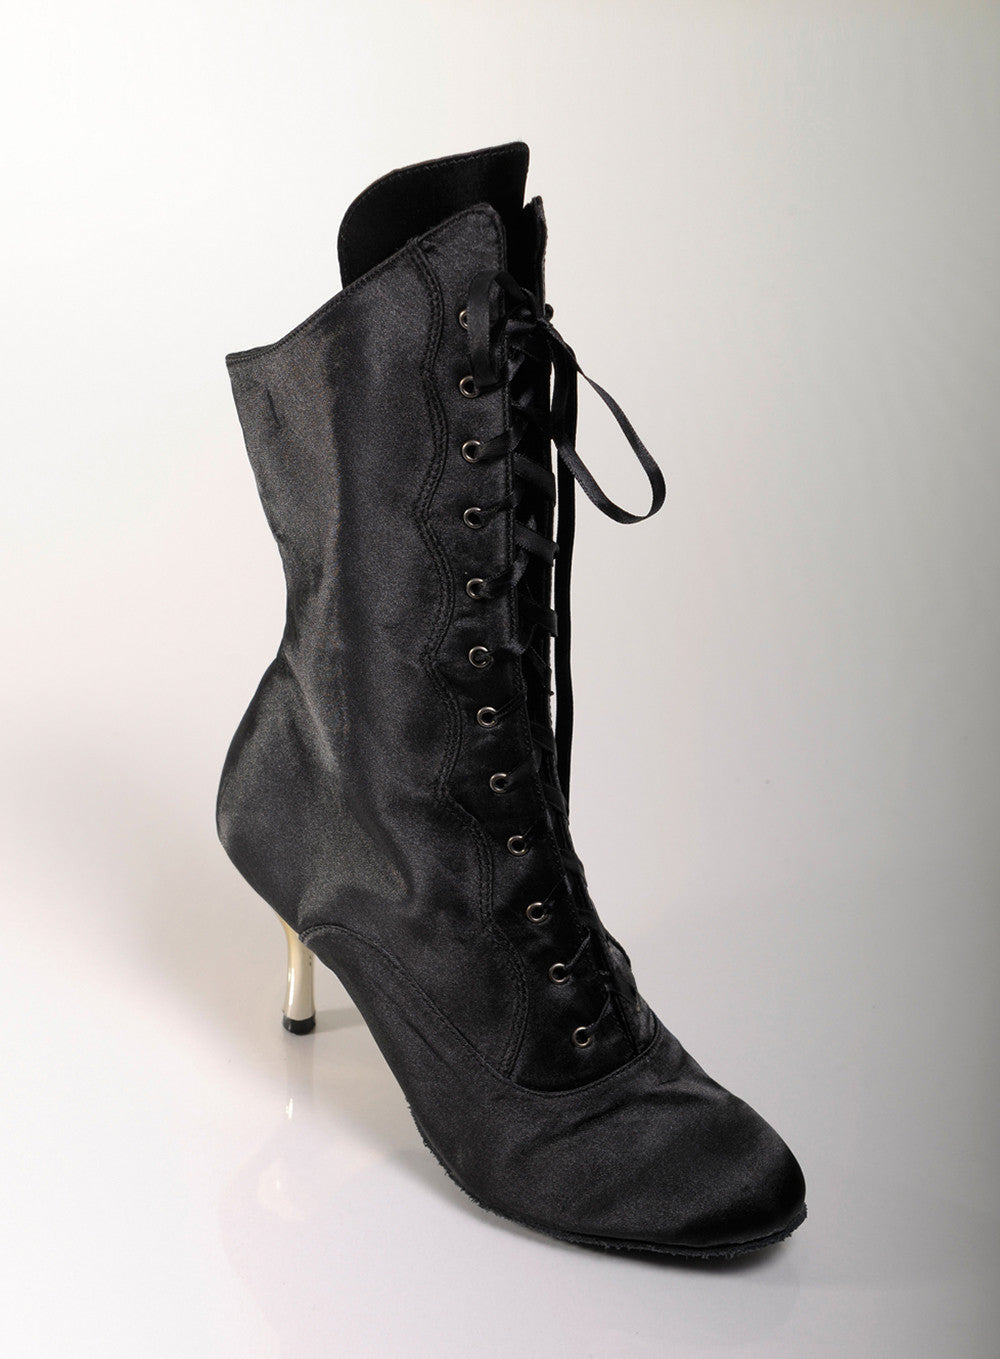 Black Satin stiletto dance boots suede sole front lace up zip on the side